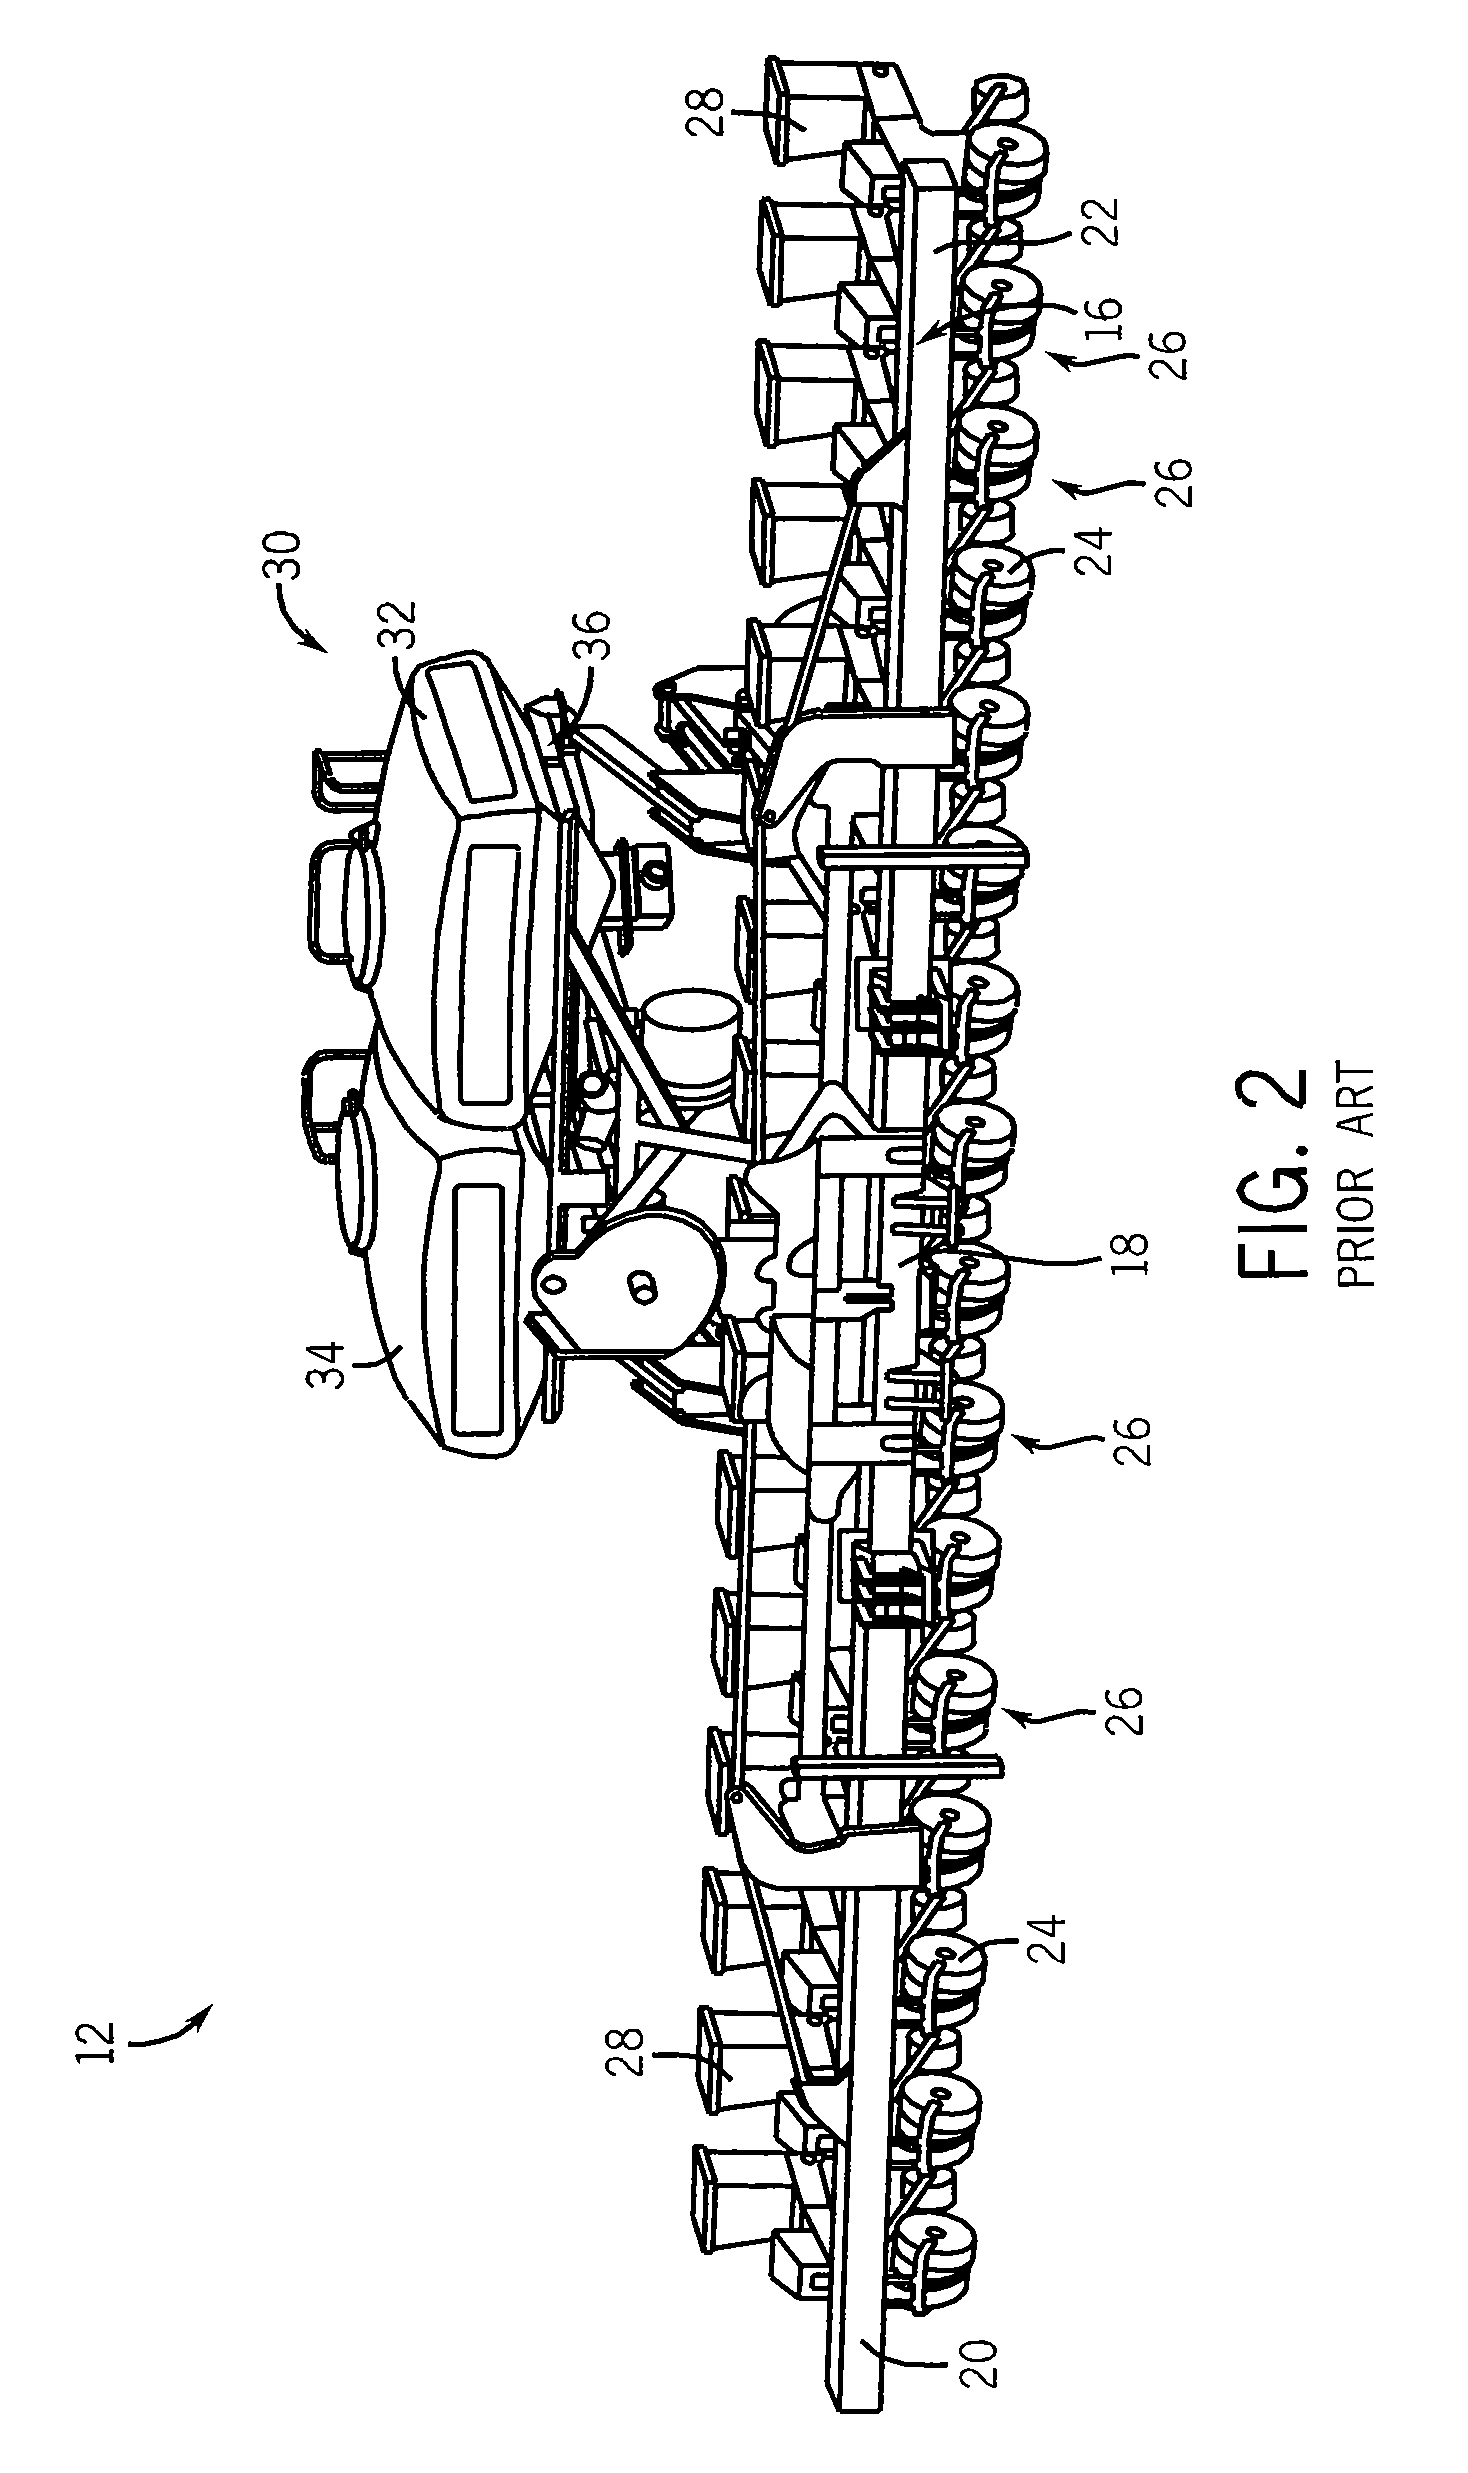 Method and apparatus for implement control of tractor hydraulics via isobus connection